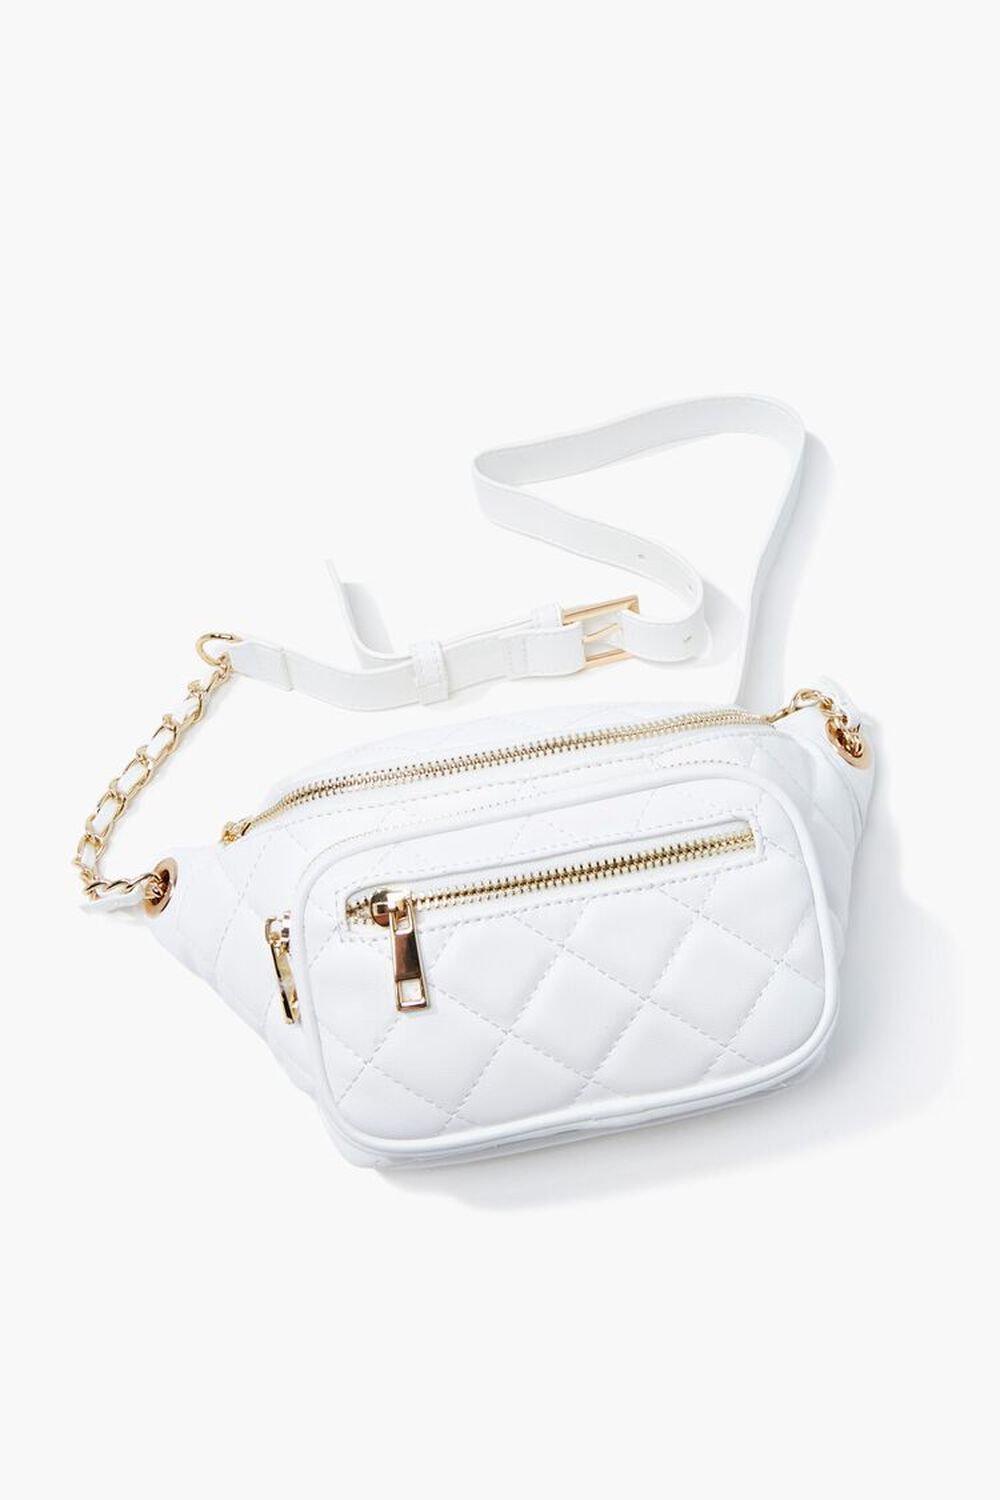 WHITE Faux Leather Quilted Fanny Pack, image 1